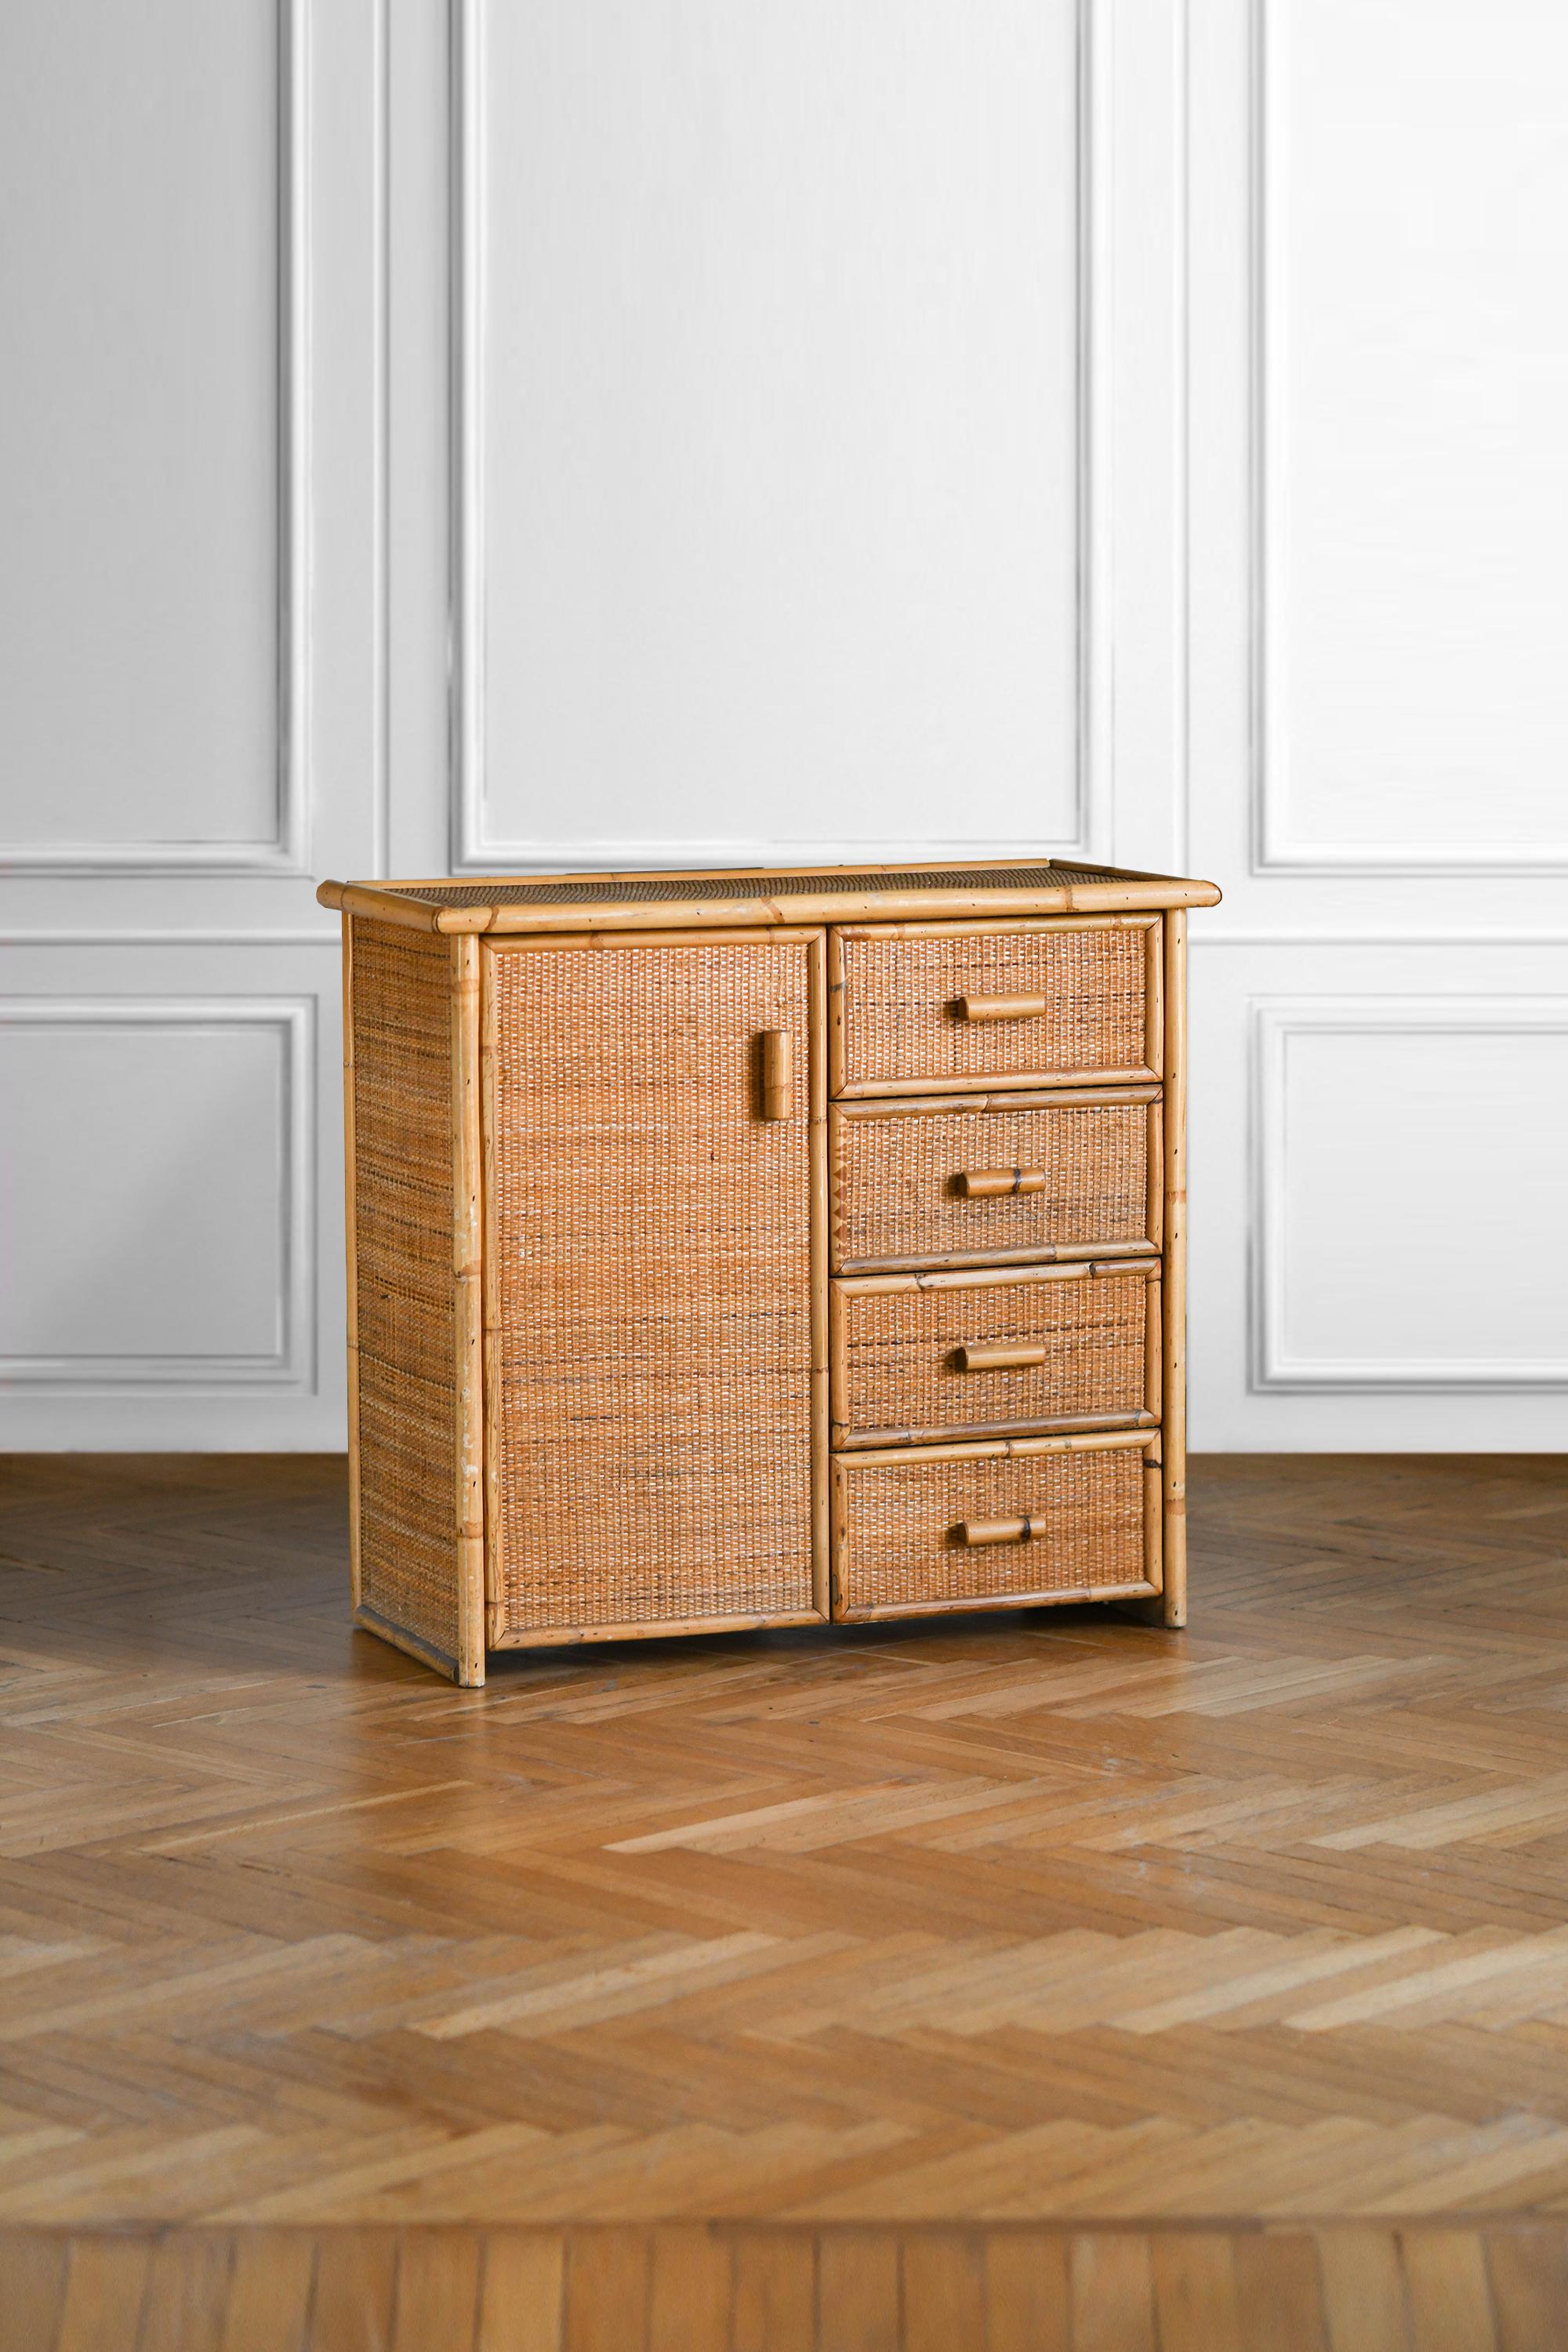 Small sideboard in rush and wicker with door and drawers.
Dimensions: 87 W x 80 H x 41 D cm
Italian production, 1980s